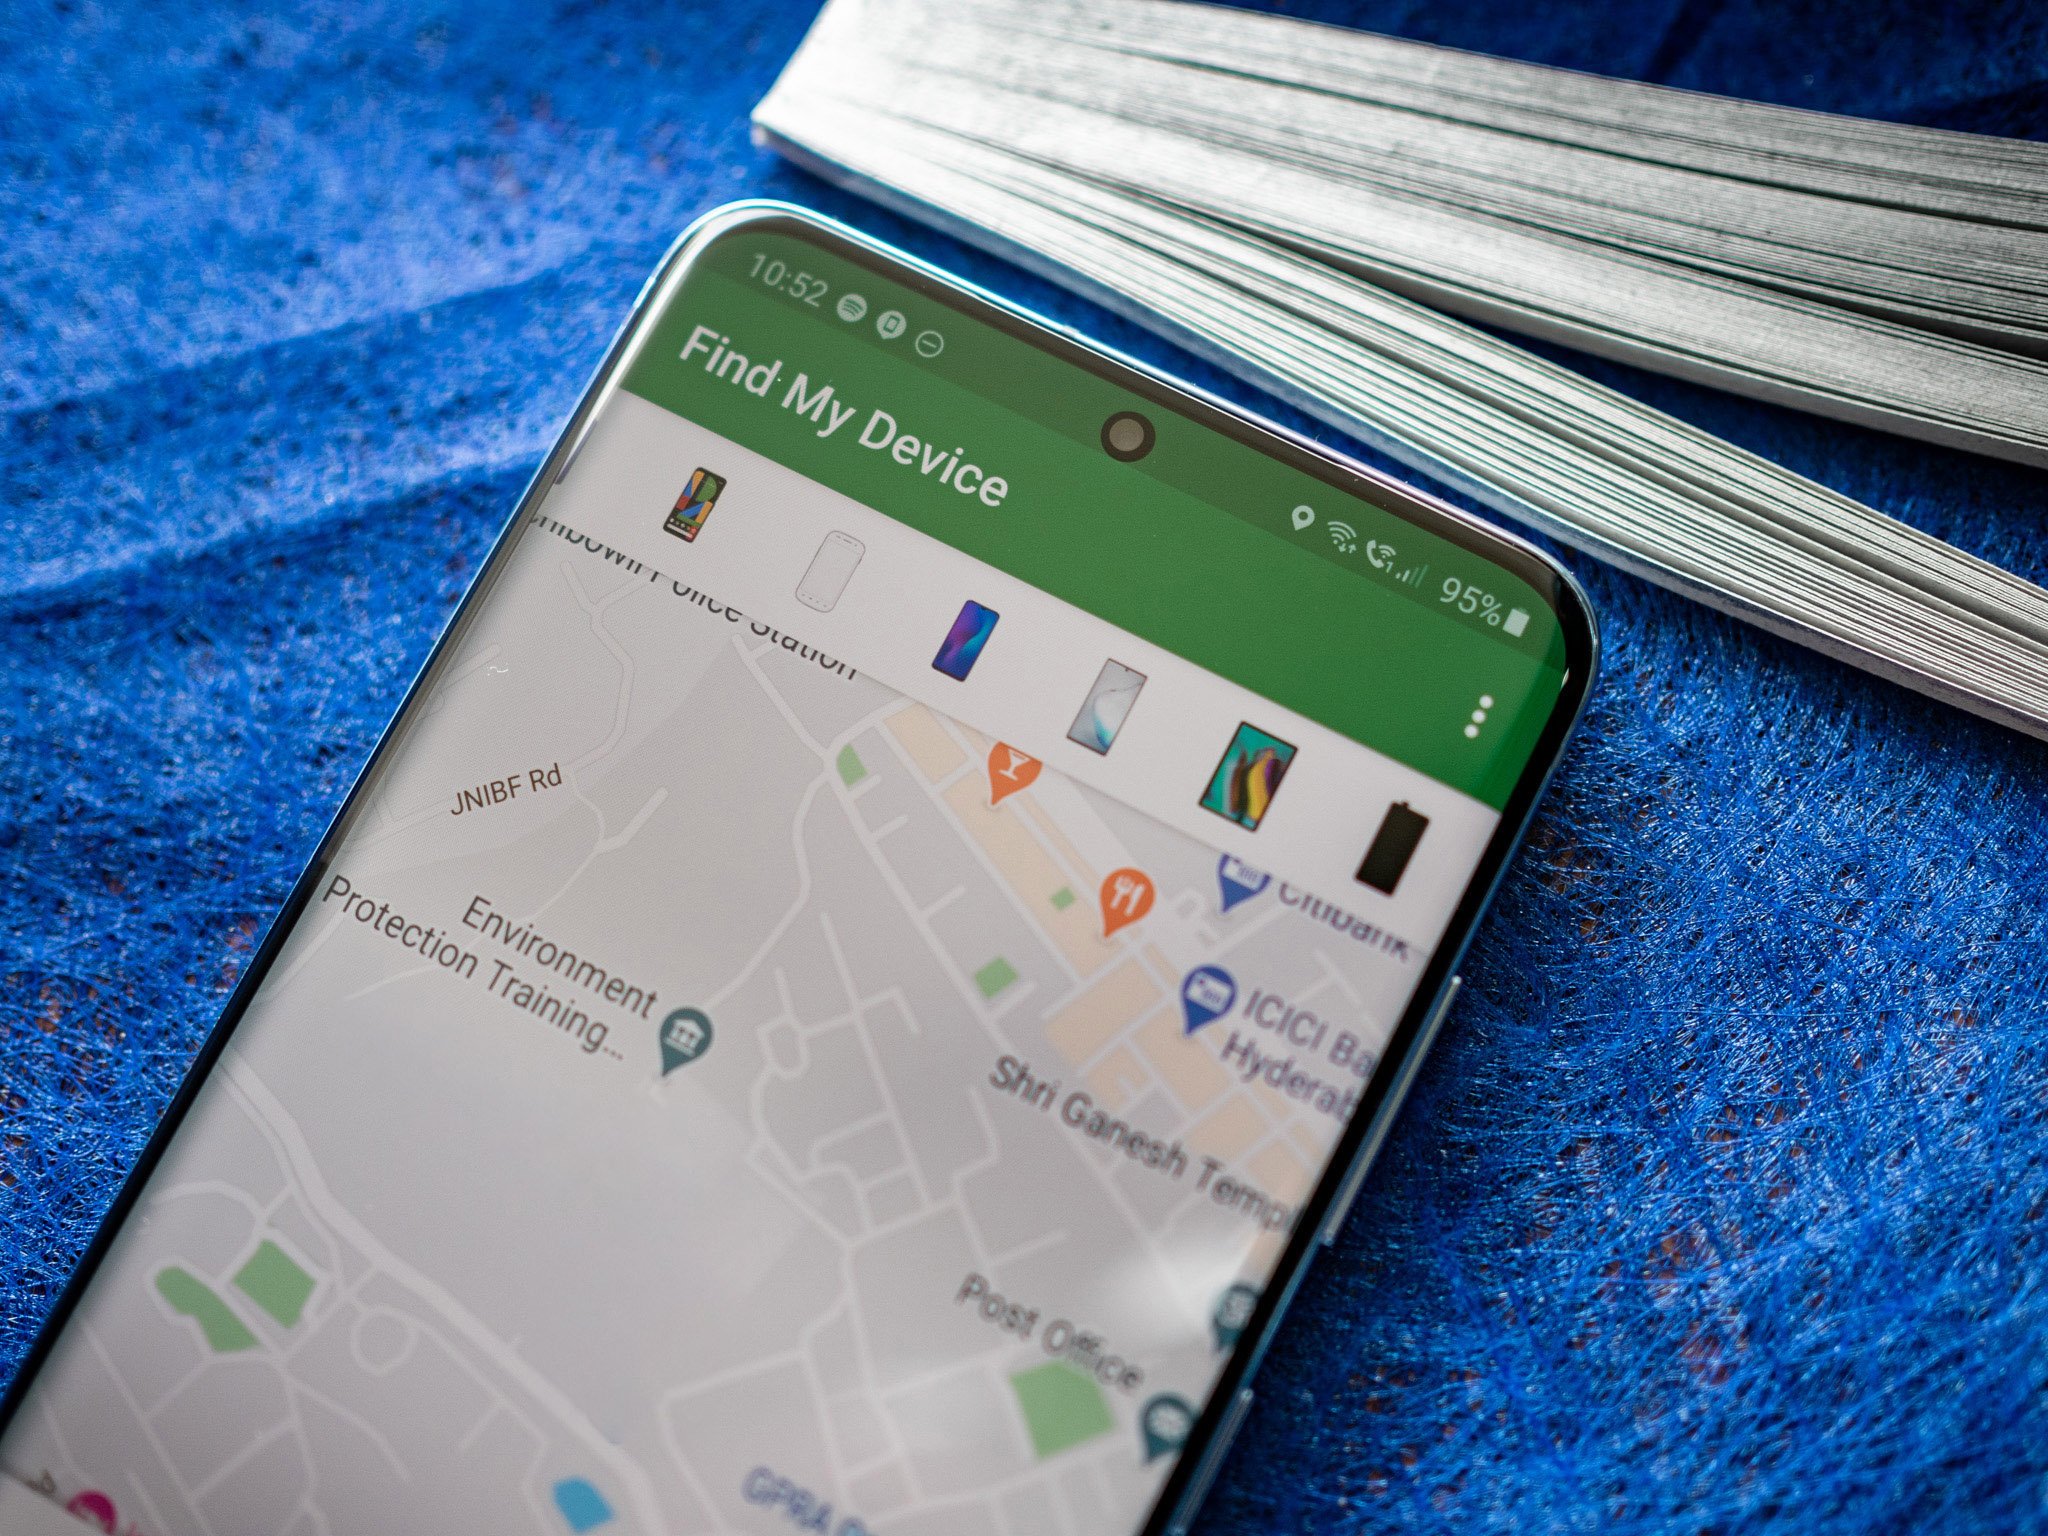 Google Starts Android Find My Device Network Rollout with Limited UWB Integration